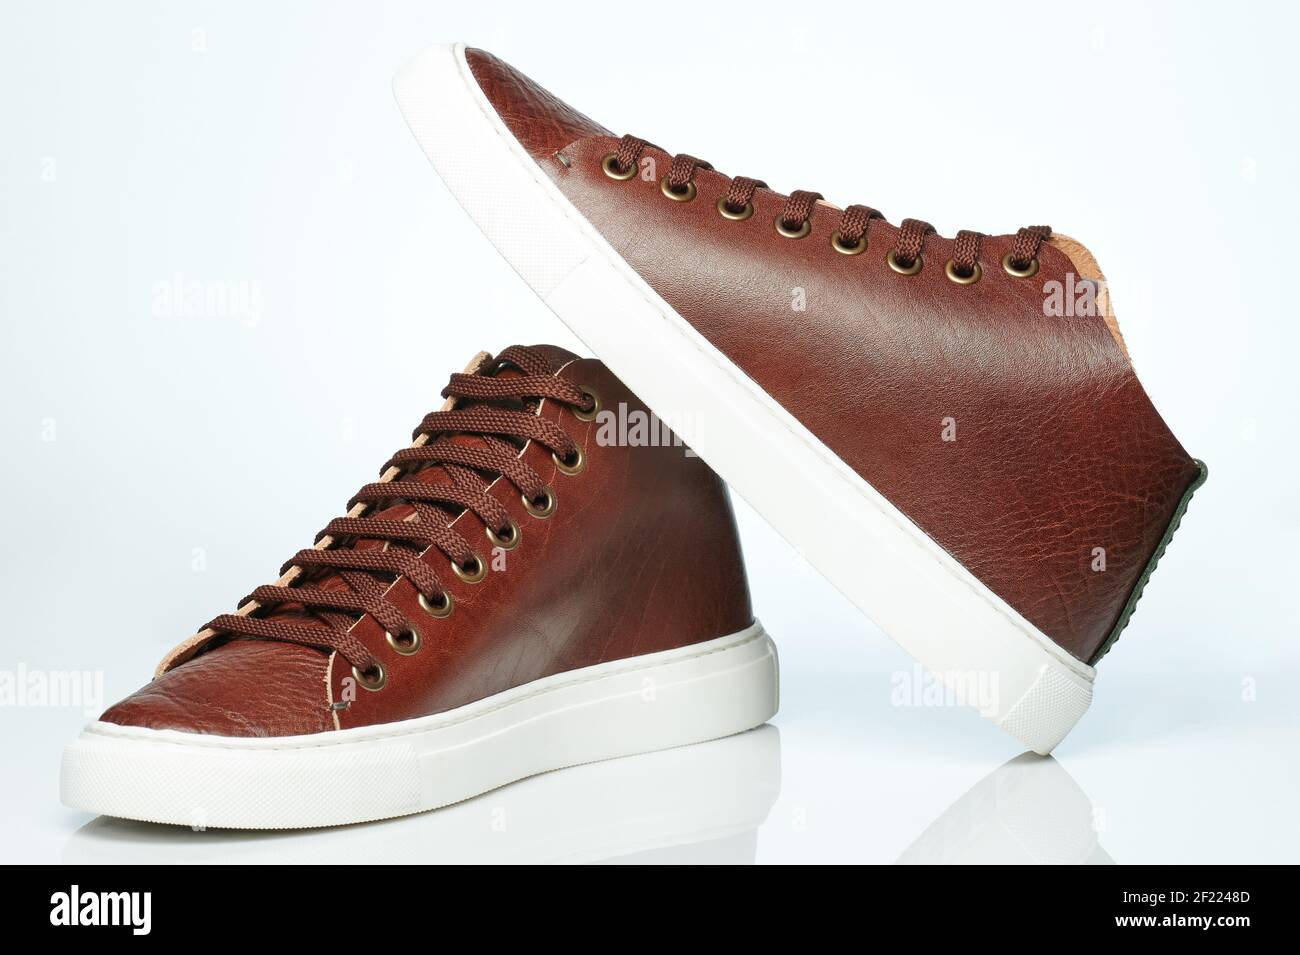 Pair of stylish leather shoes for catalog display isolated Stock Photo